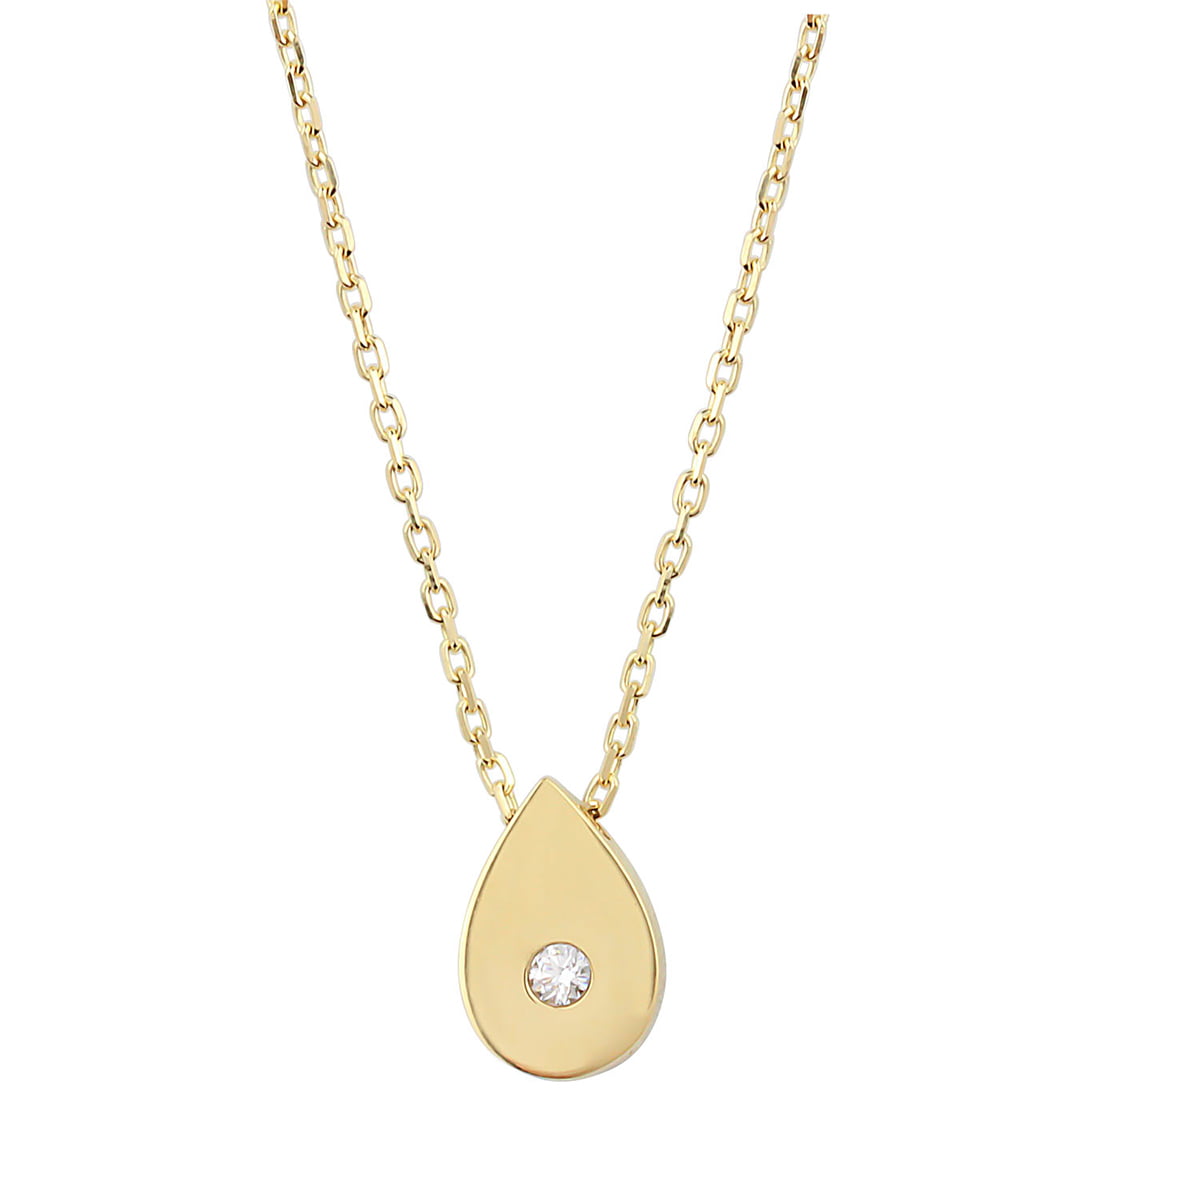 18ct Yellow Gold PearDrop Pendant Necklace